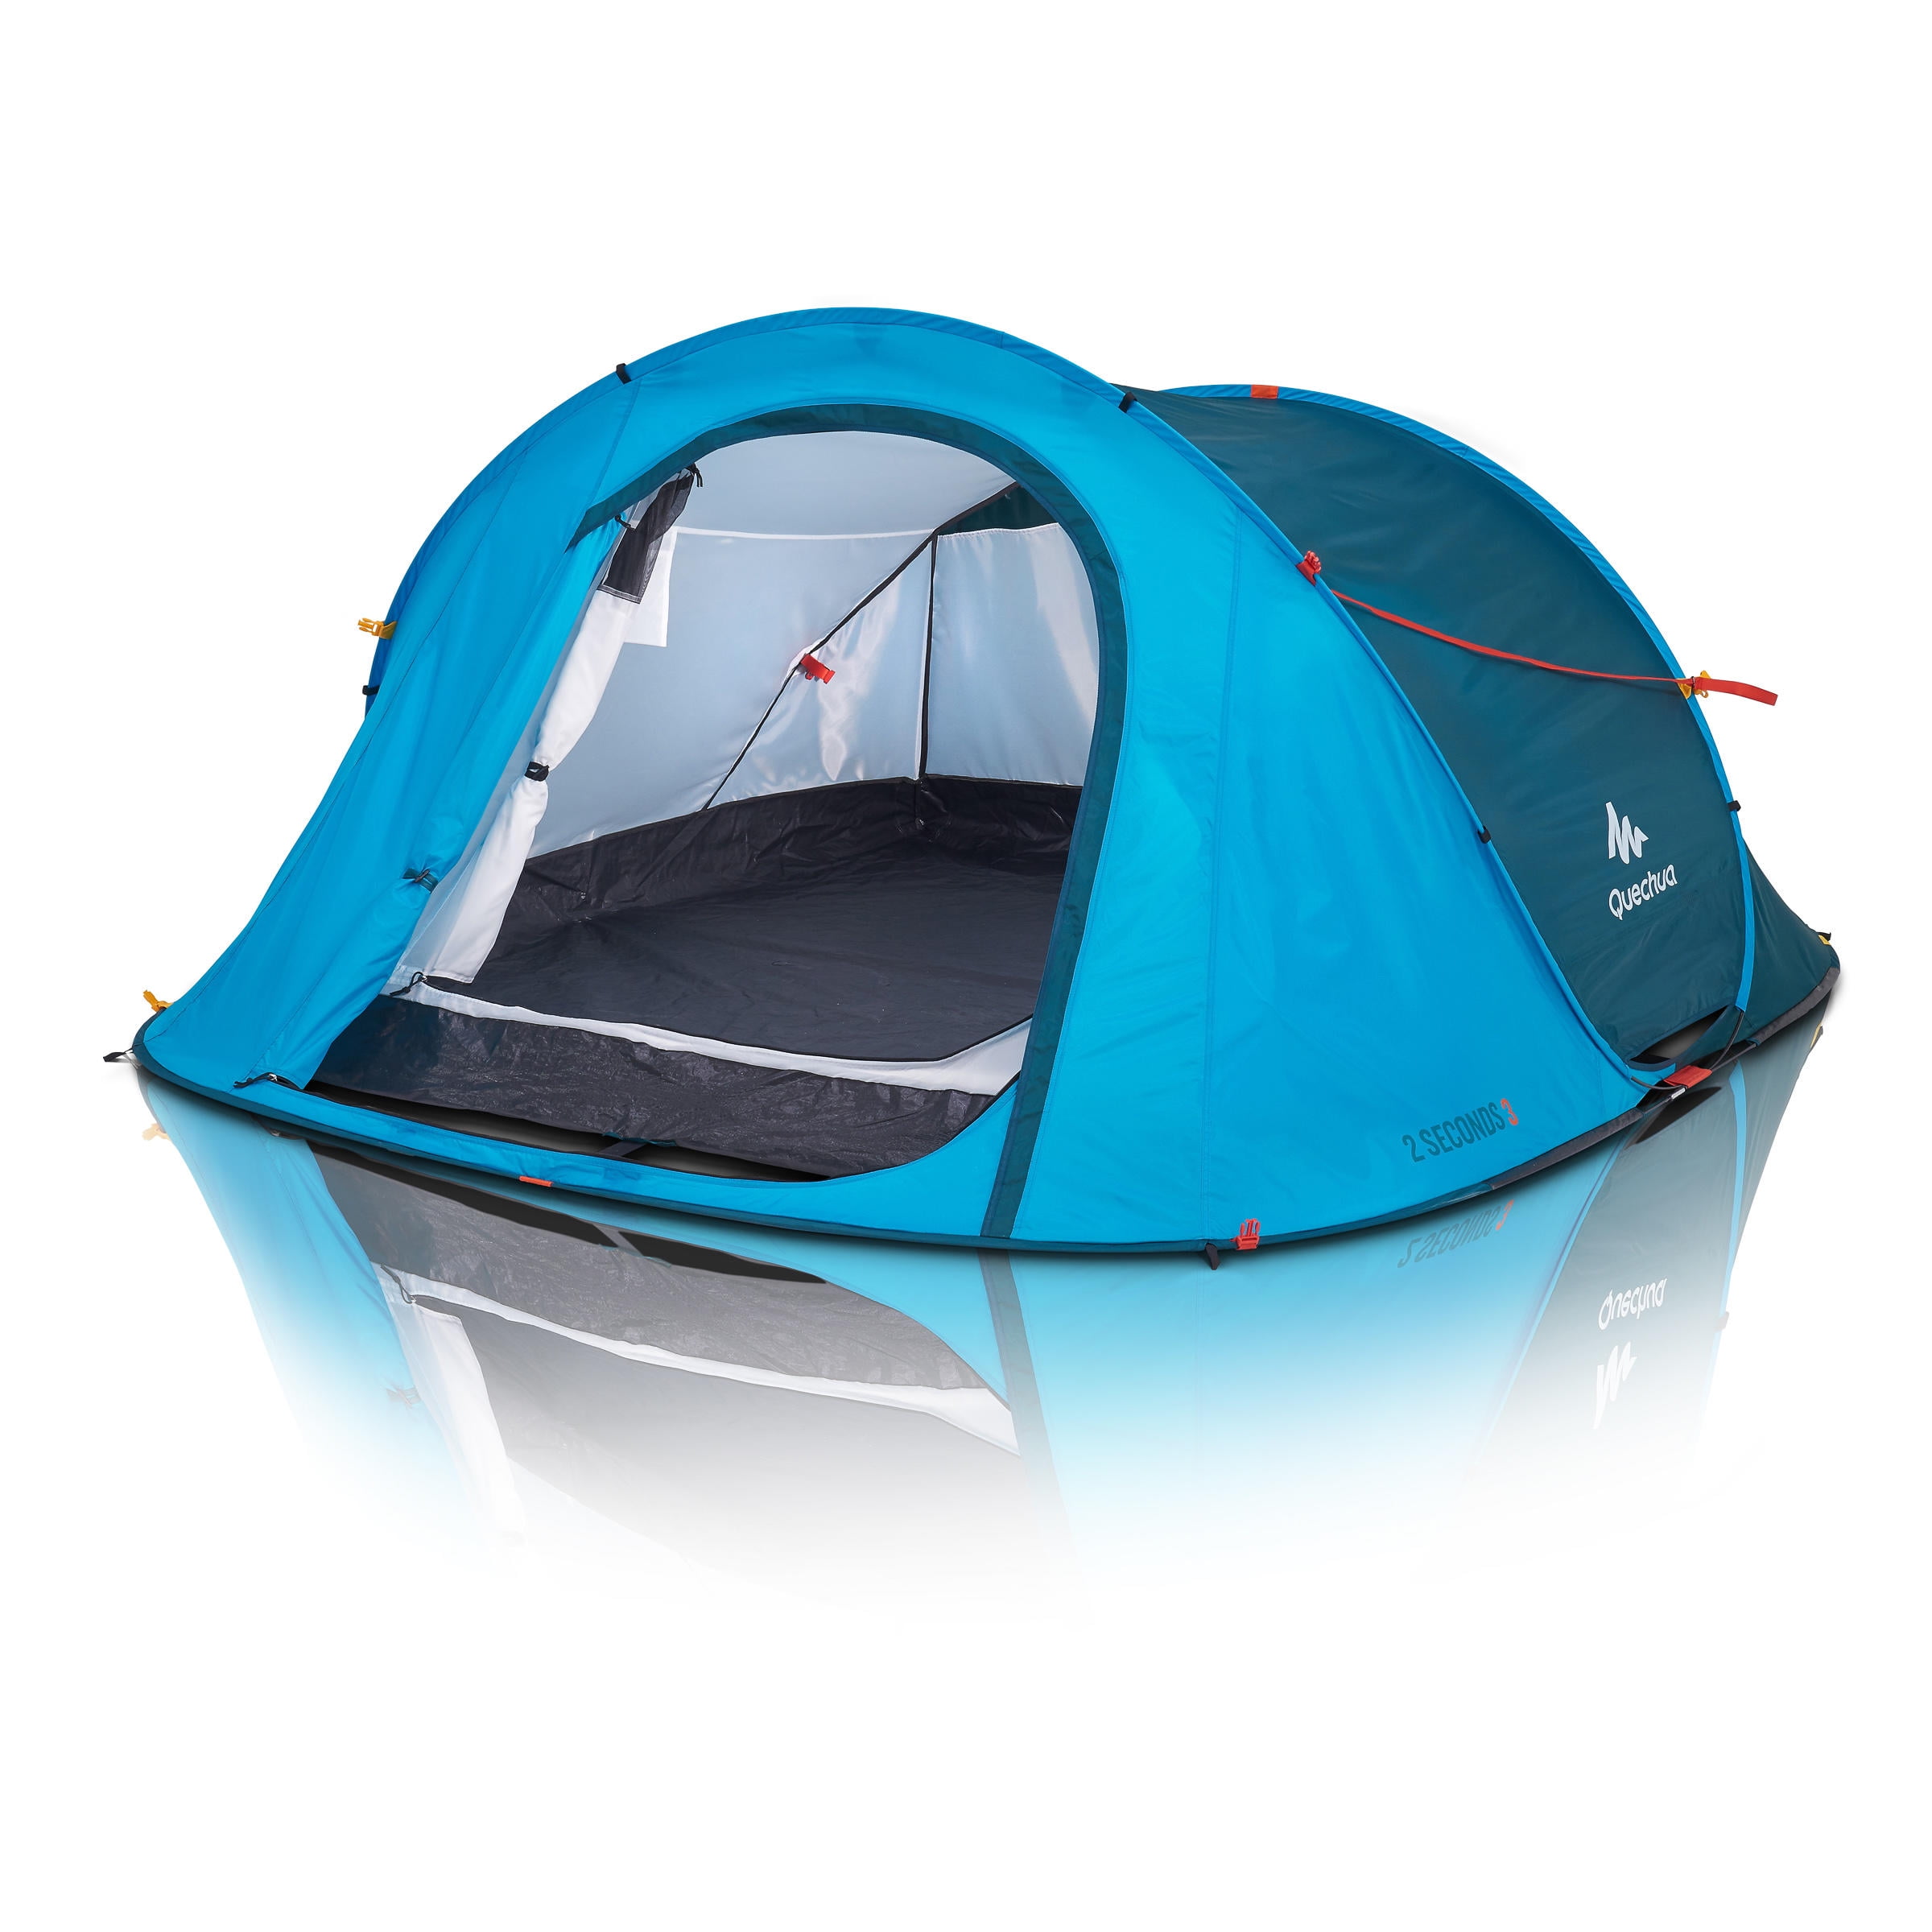 Enzovoorts Afleiding uitlokken Decathlon Quechua, 3 Person 2 Second Pop Up Camping Tent, with Waterproof  Technology, Double Wall Technology, Blue - Walmart.com